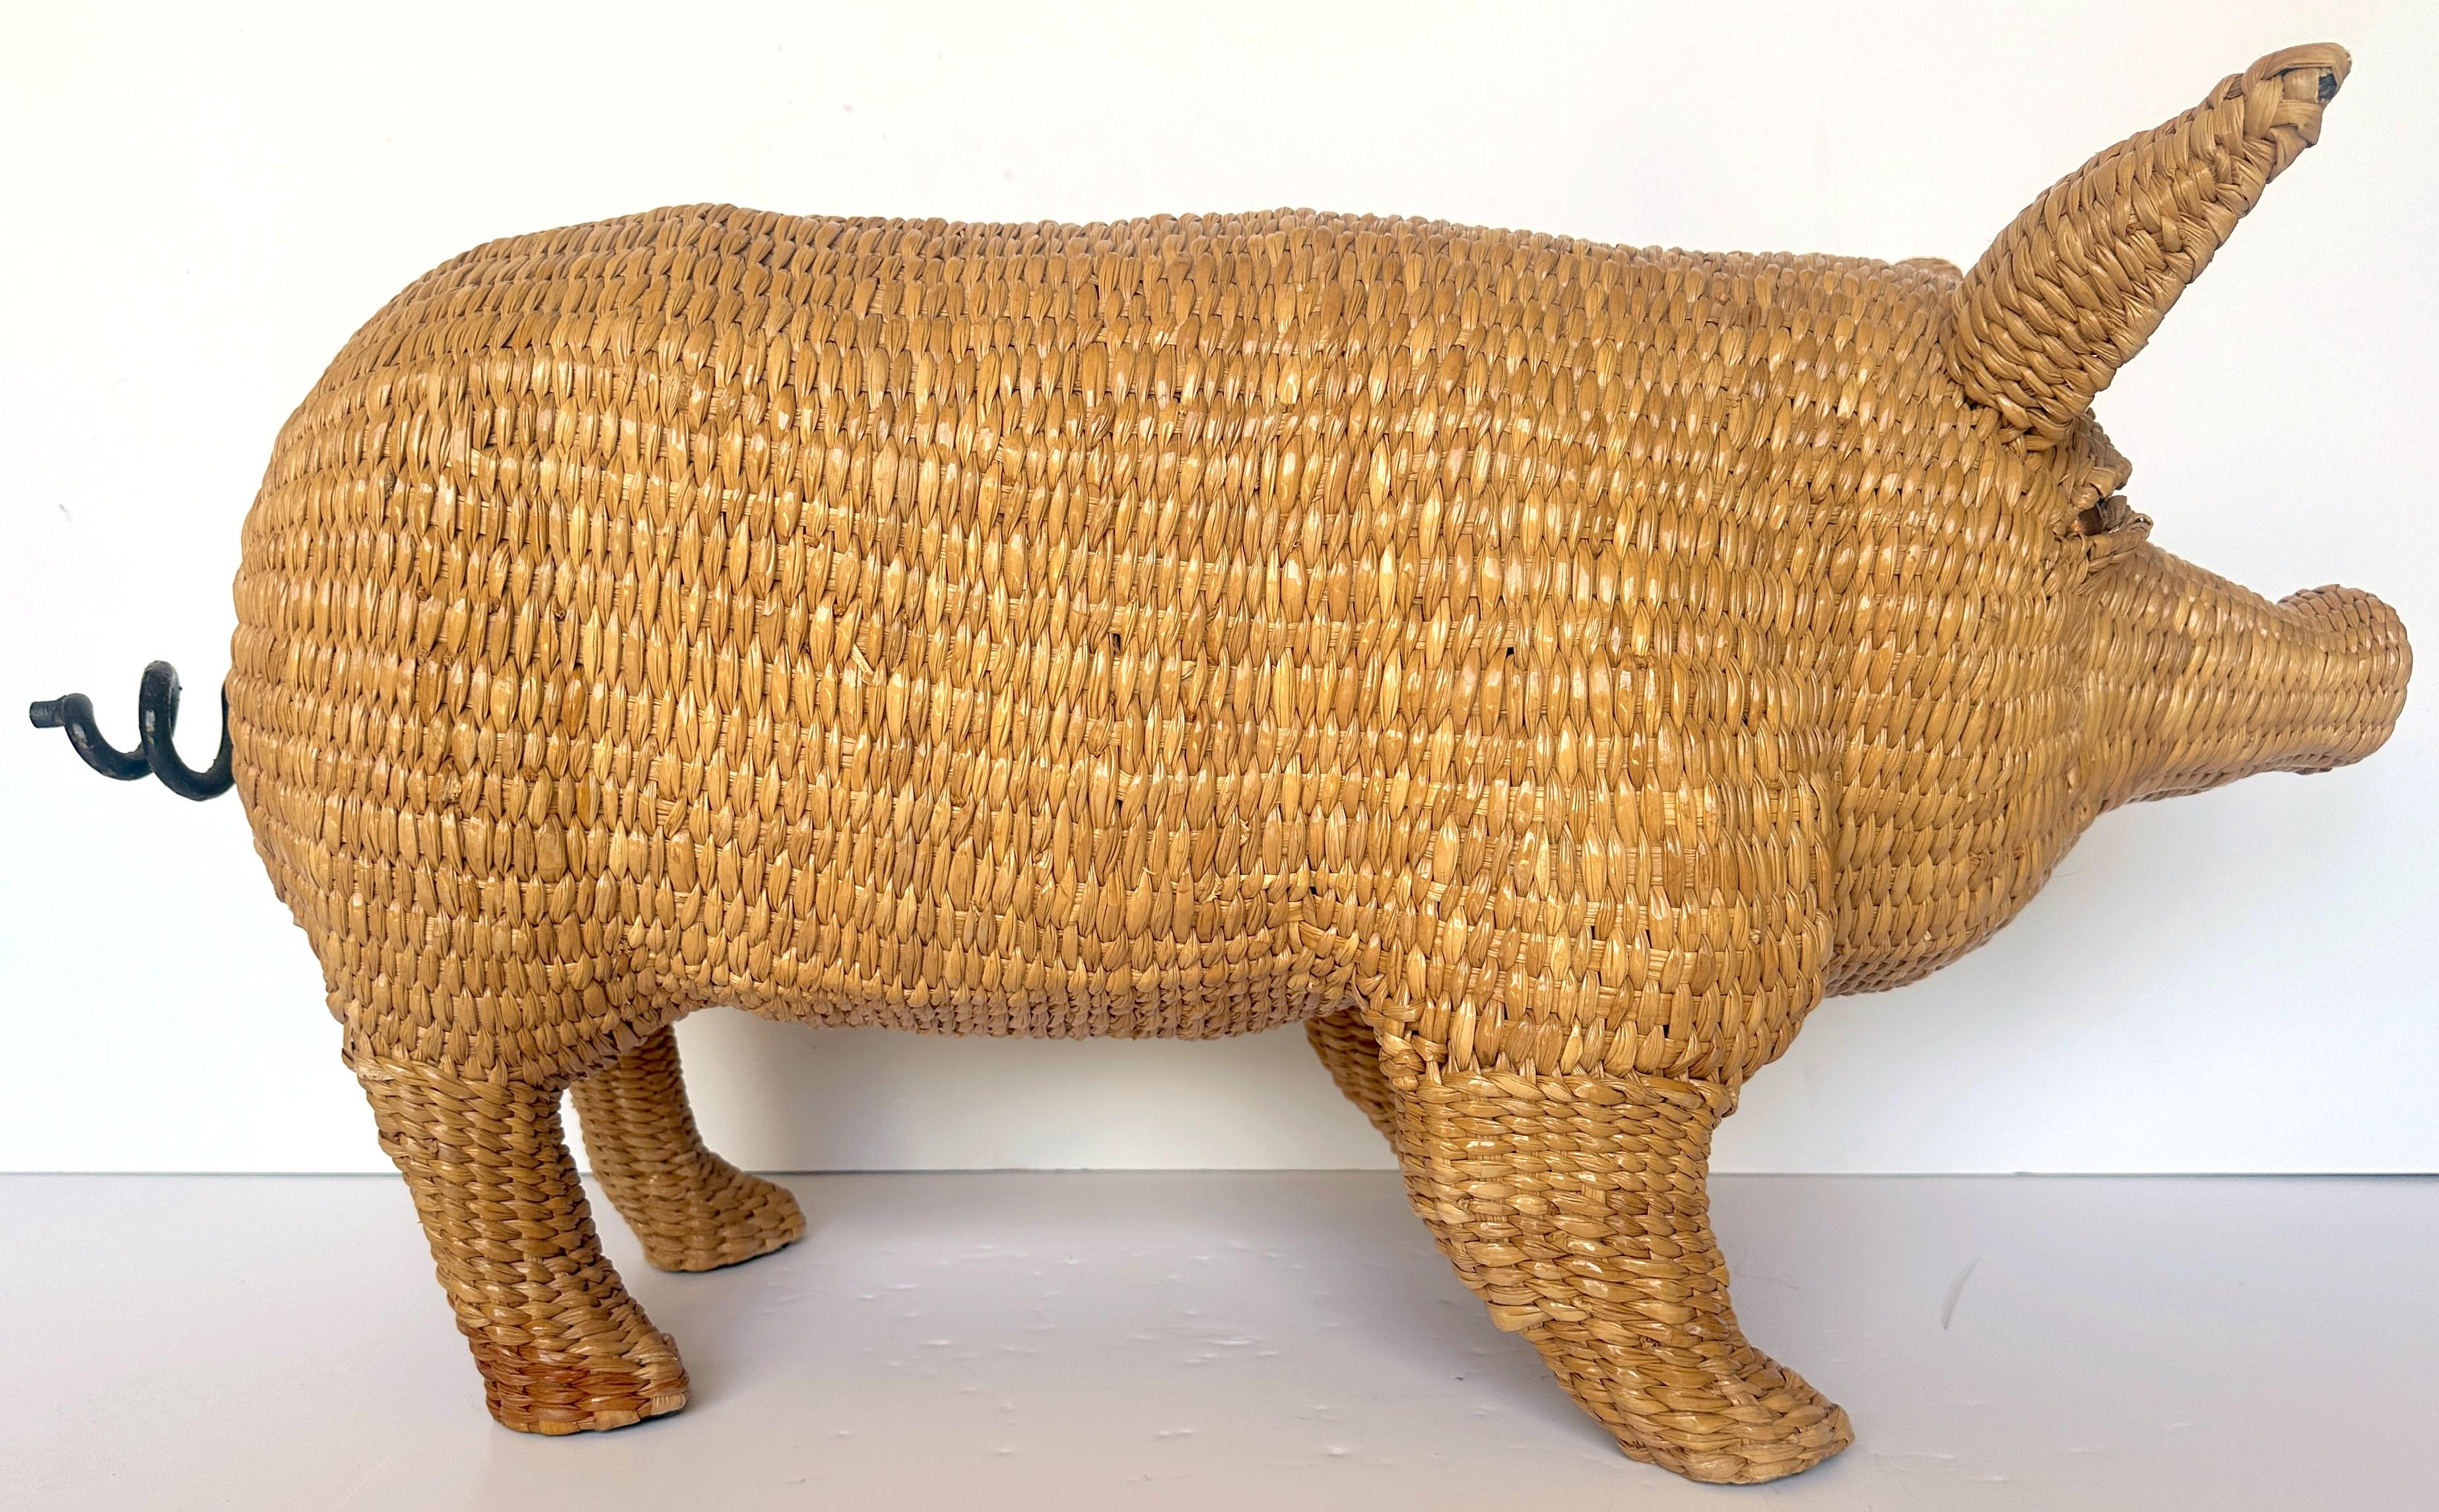 Willow Mario Lopez Torres Pig Sculpture, Signed c. 1970s For Sale